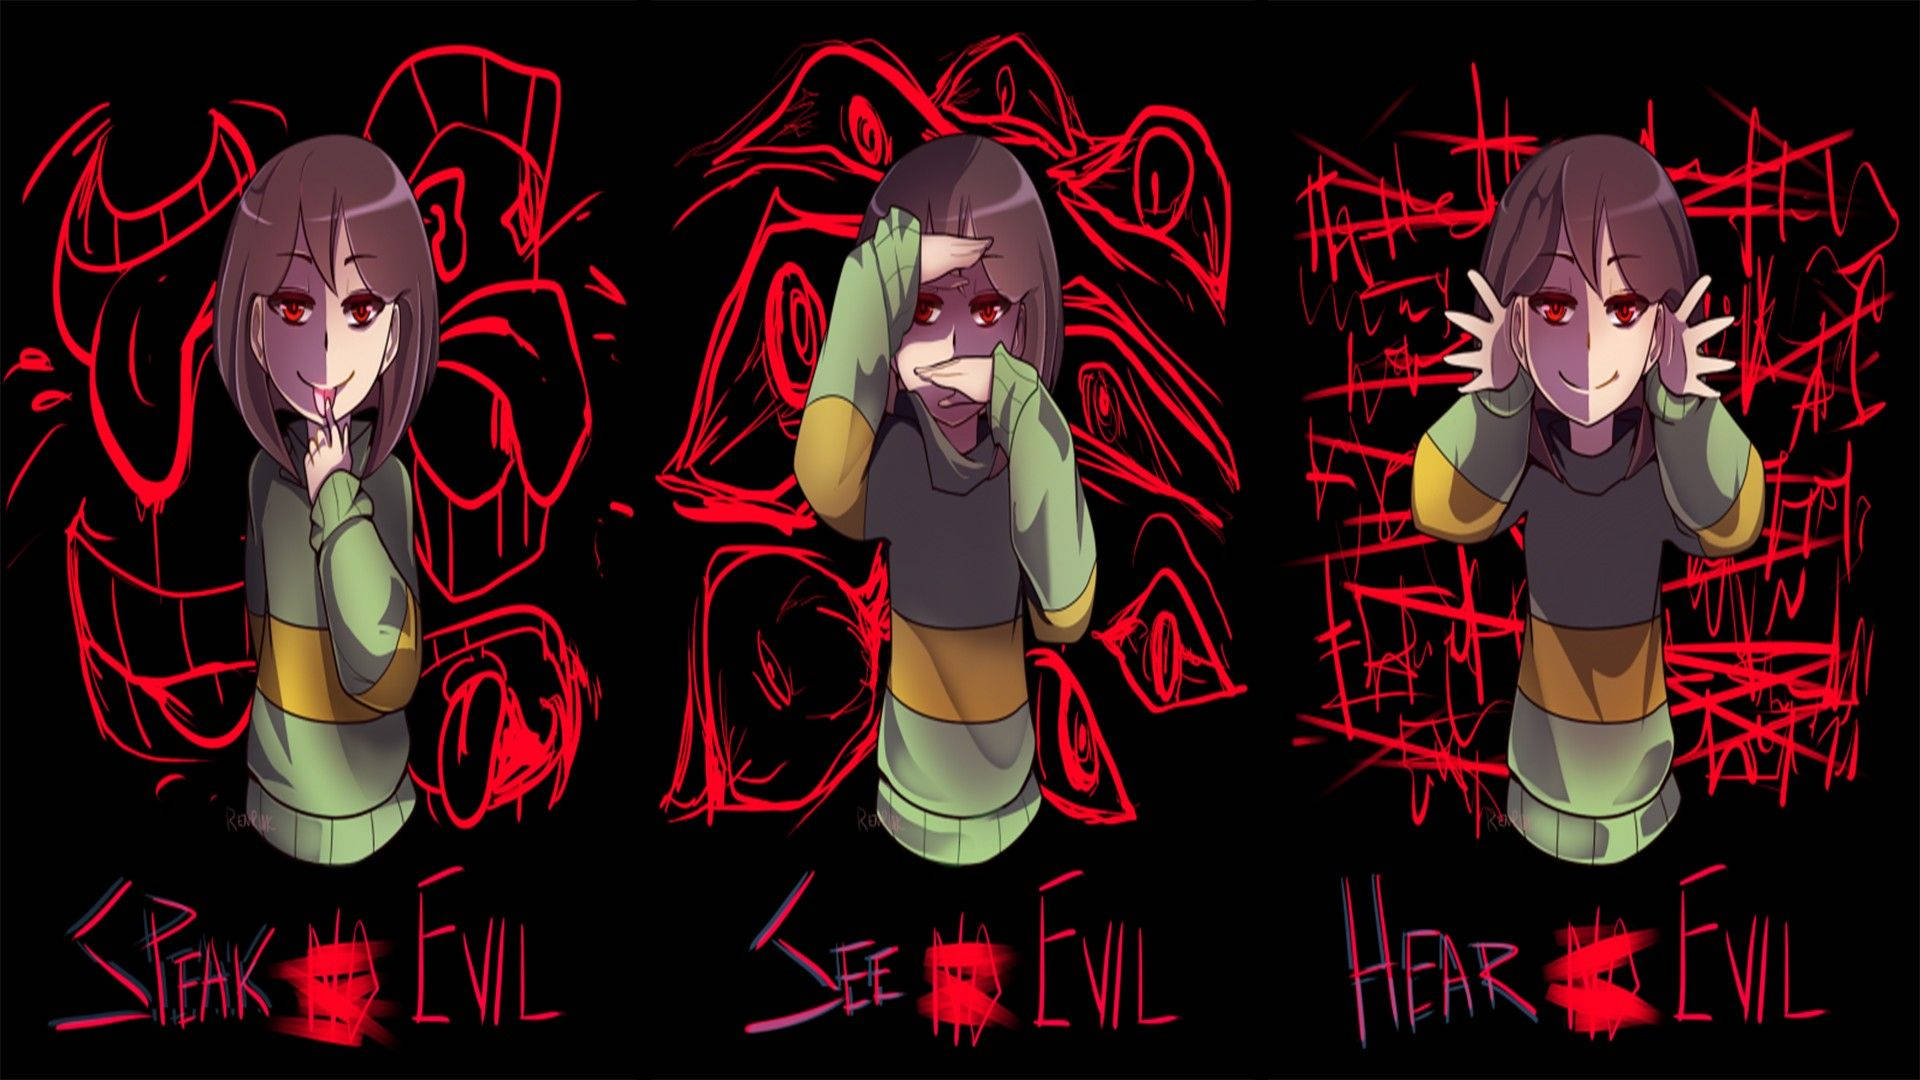 Scary Undertale Chara fan art with red drawings wallpaper.